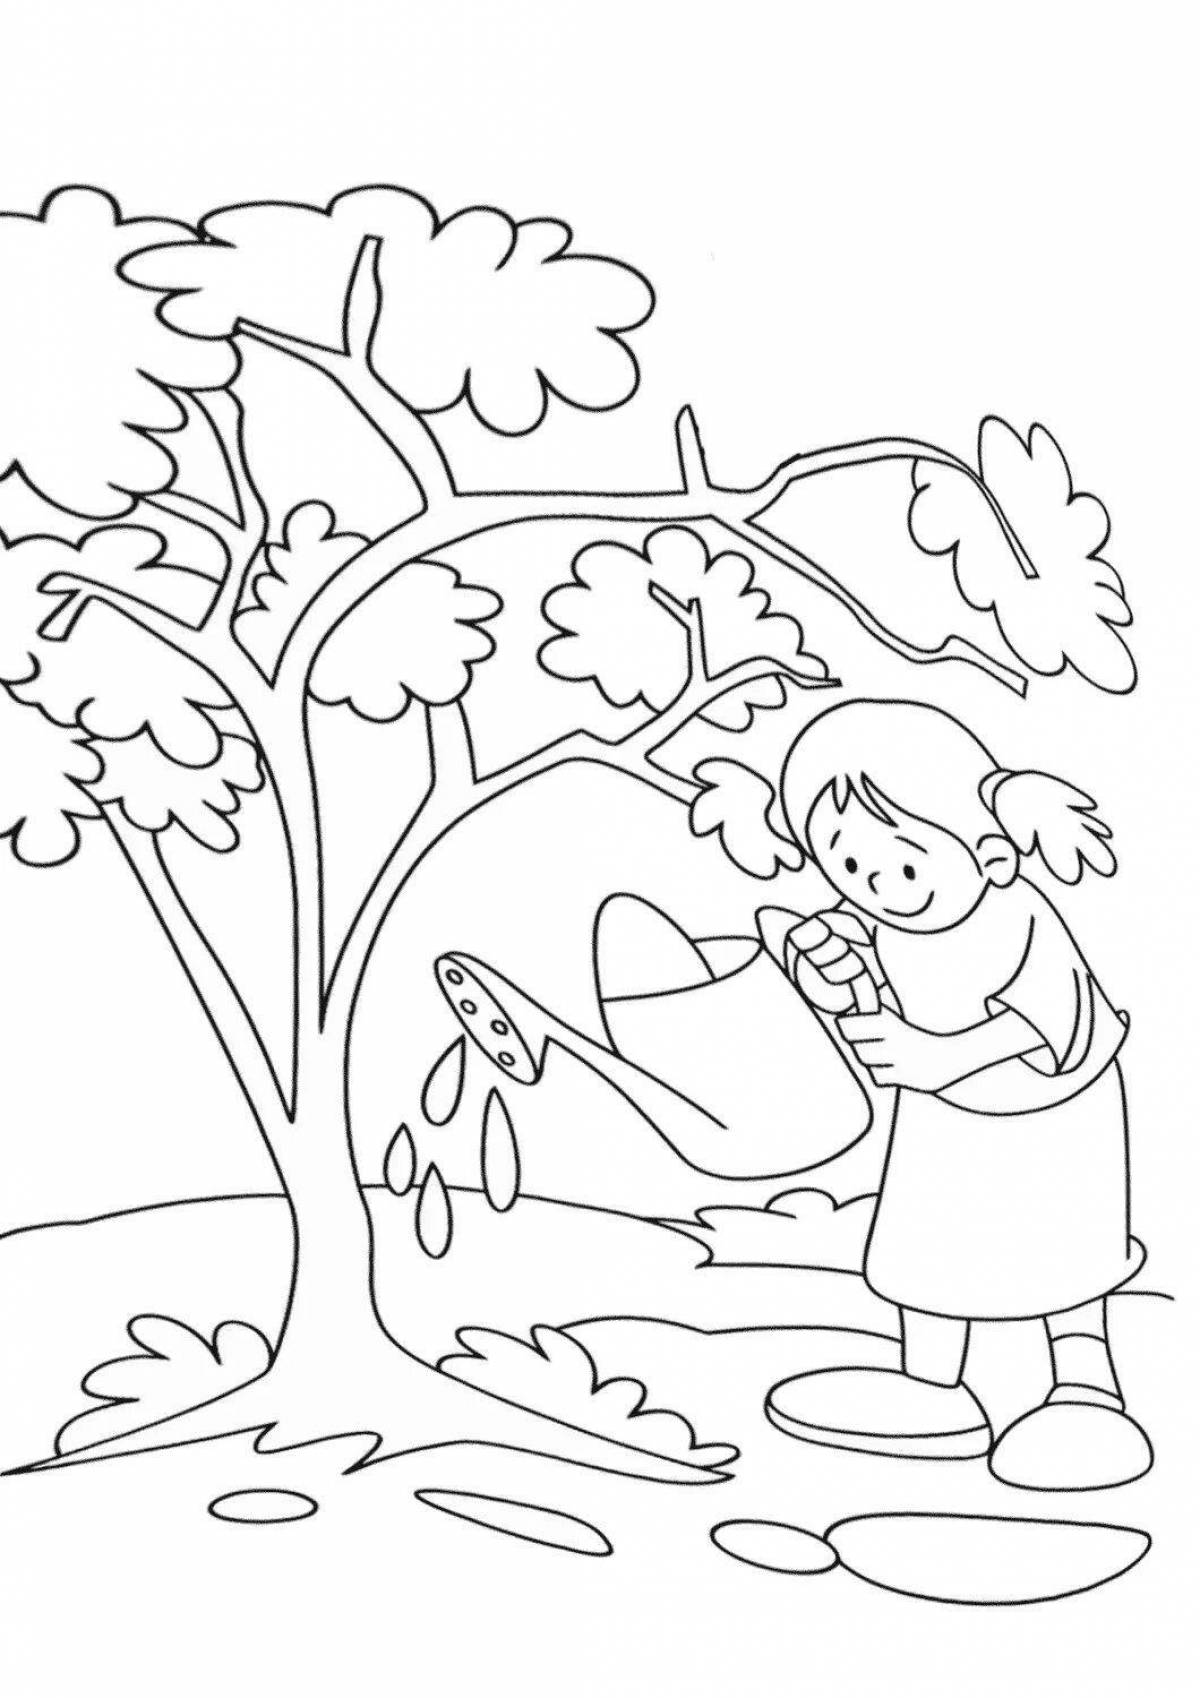 Bright coloring page save nature